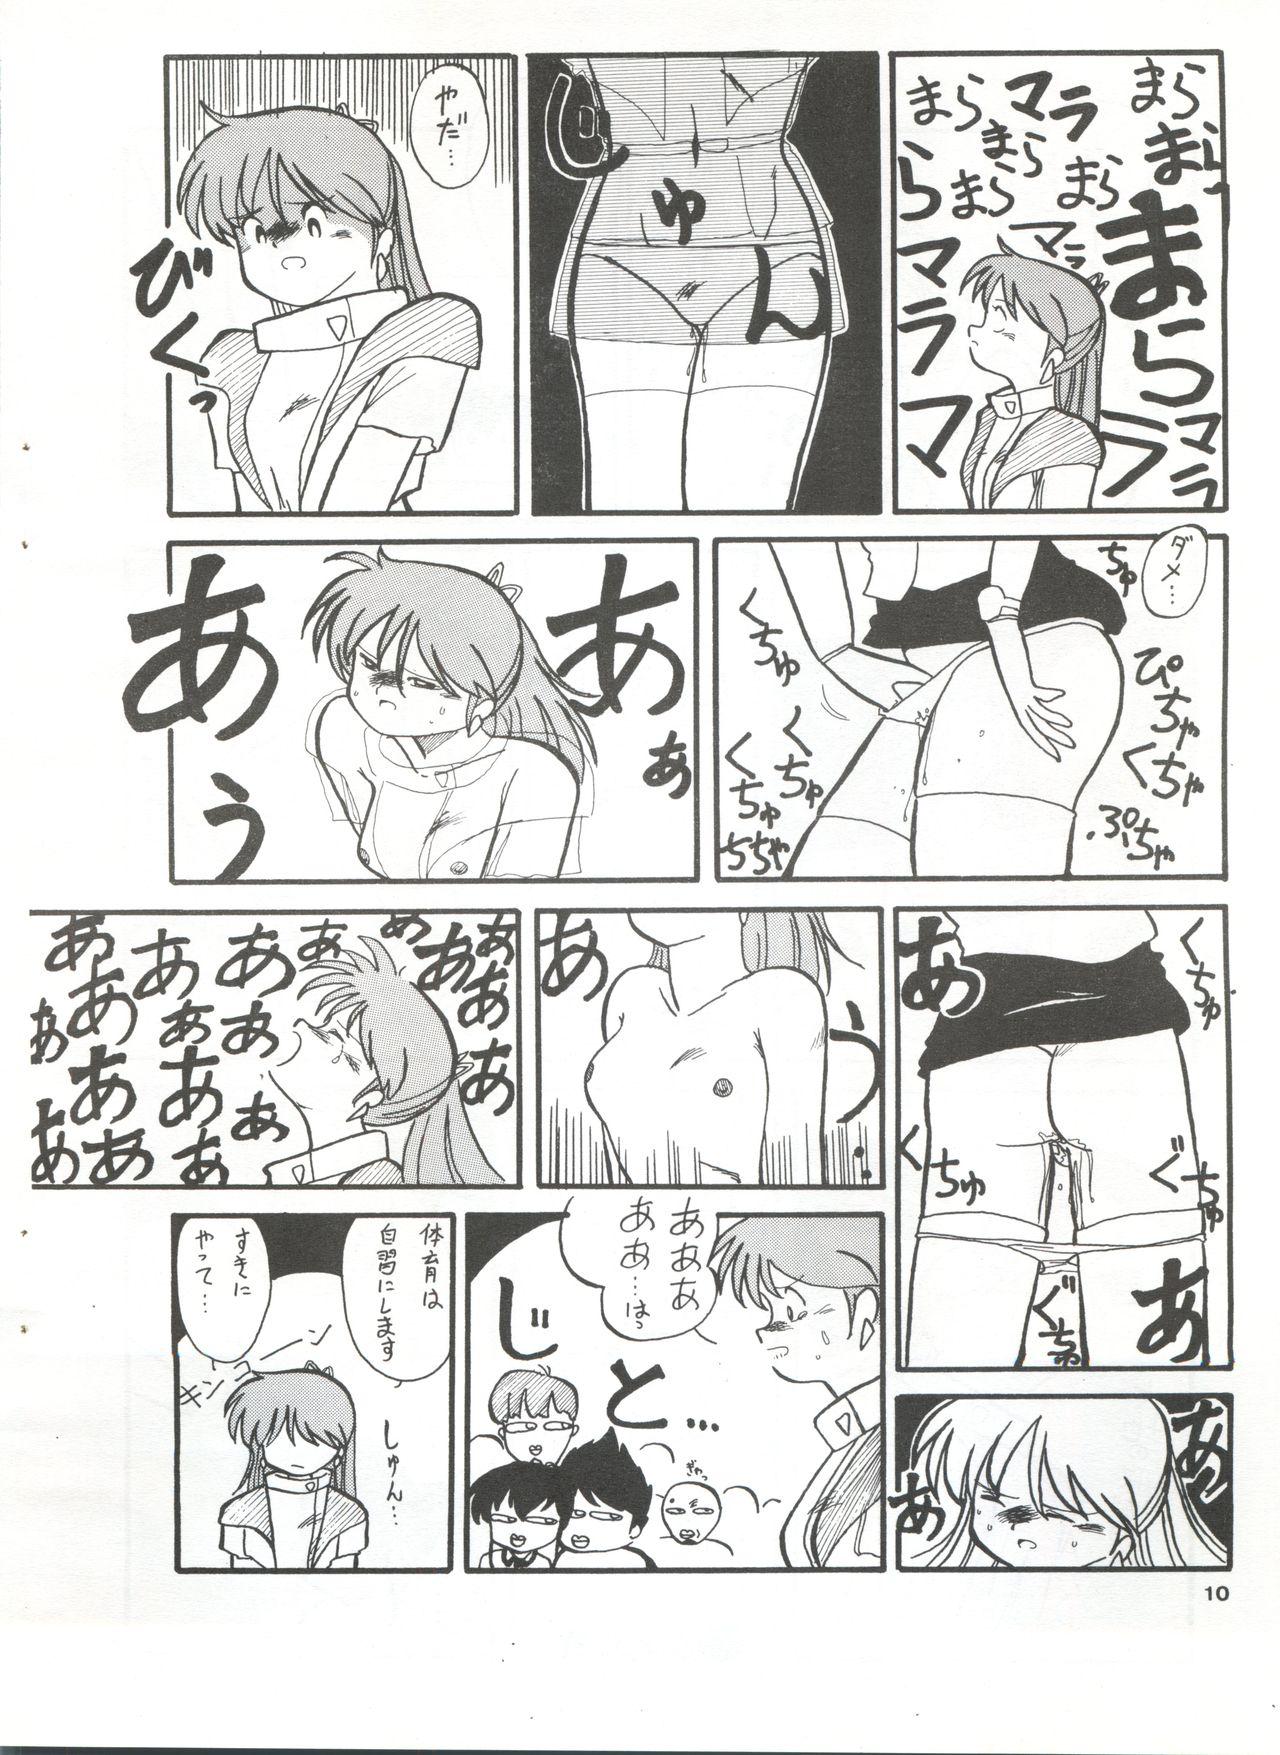 Messy YATTE! YATTE! Mission 1 - Dirty pair Sonic soldier borgman Oral - Page 9